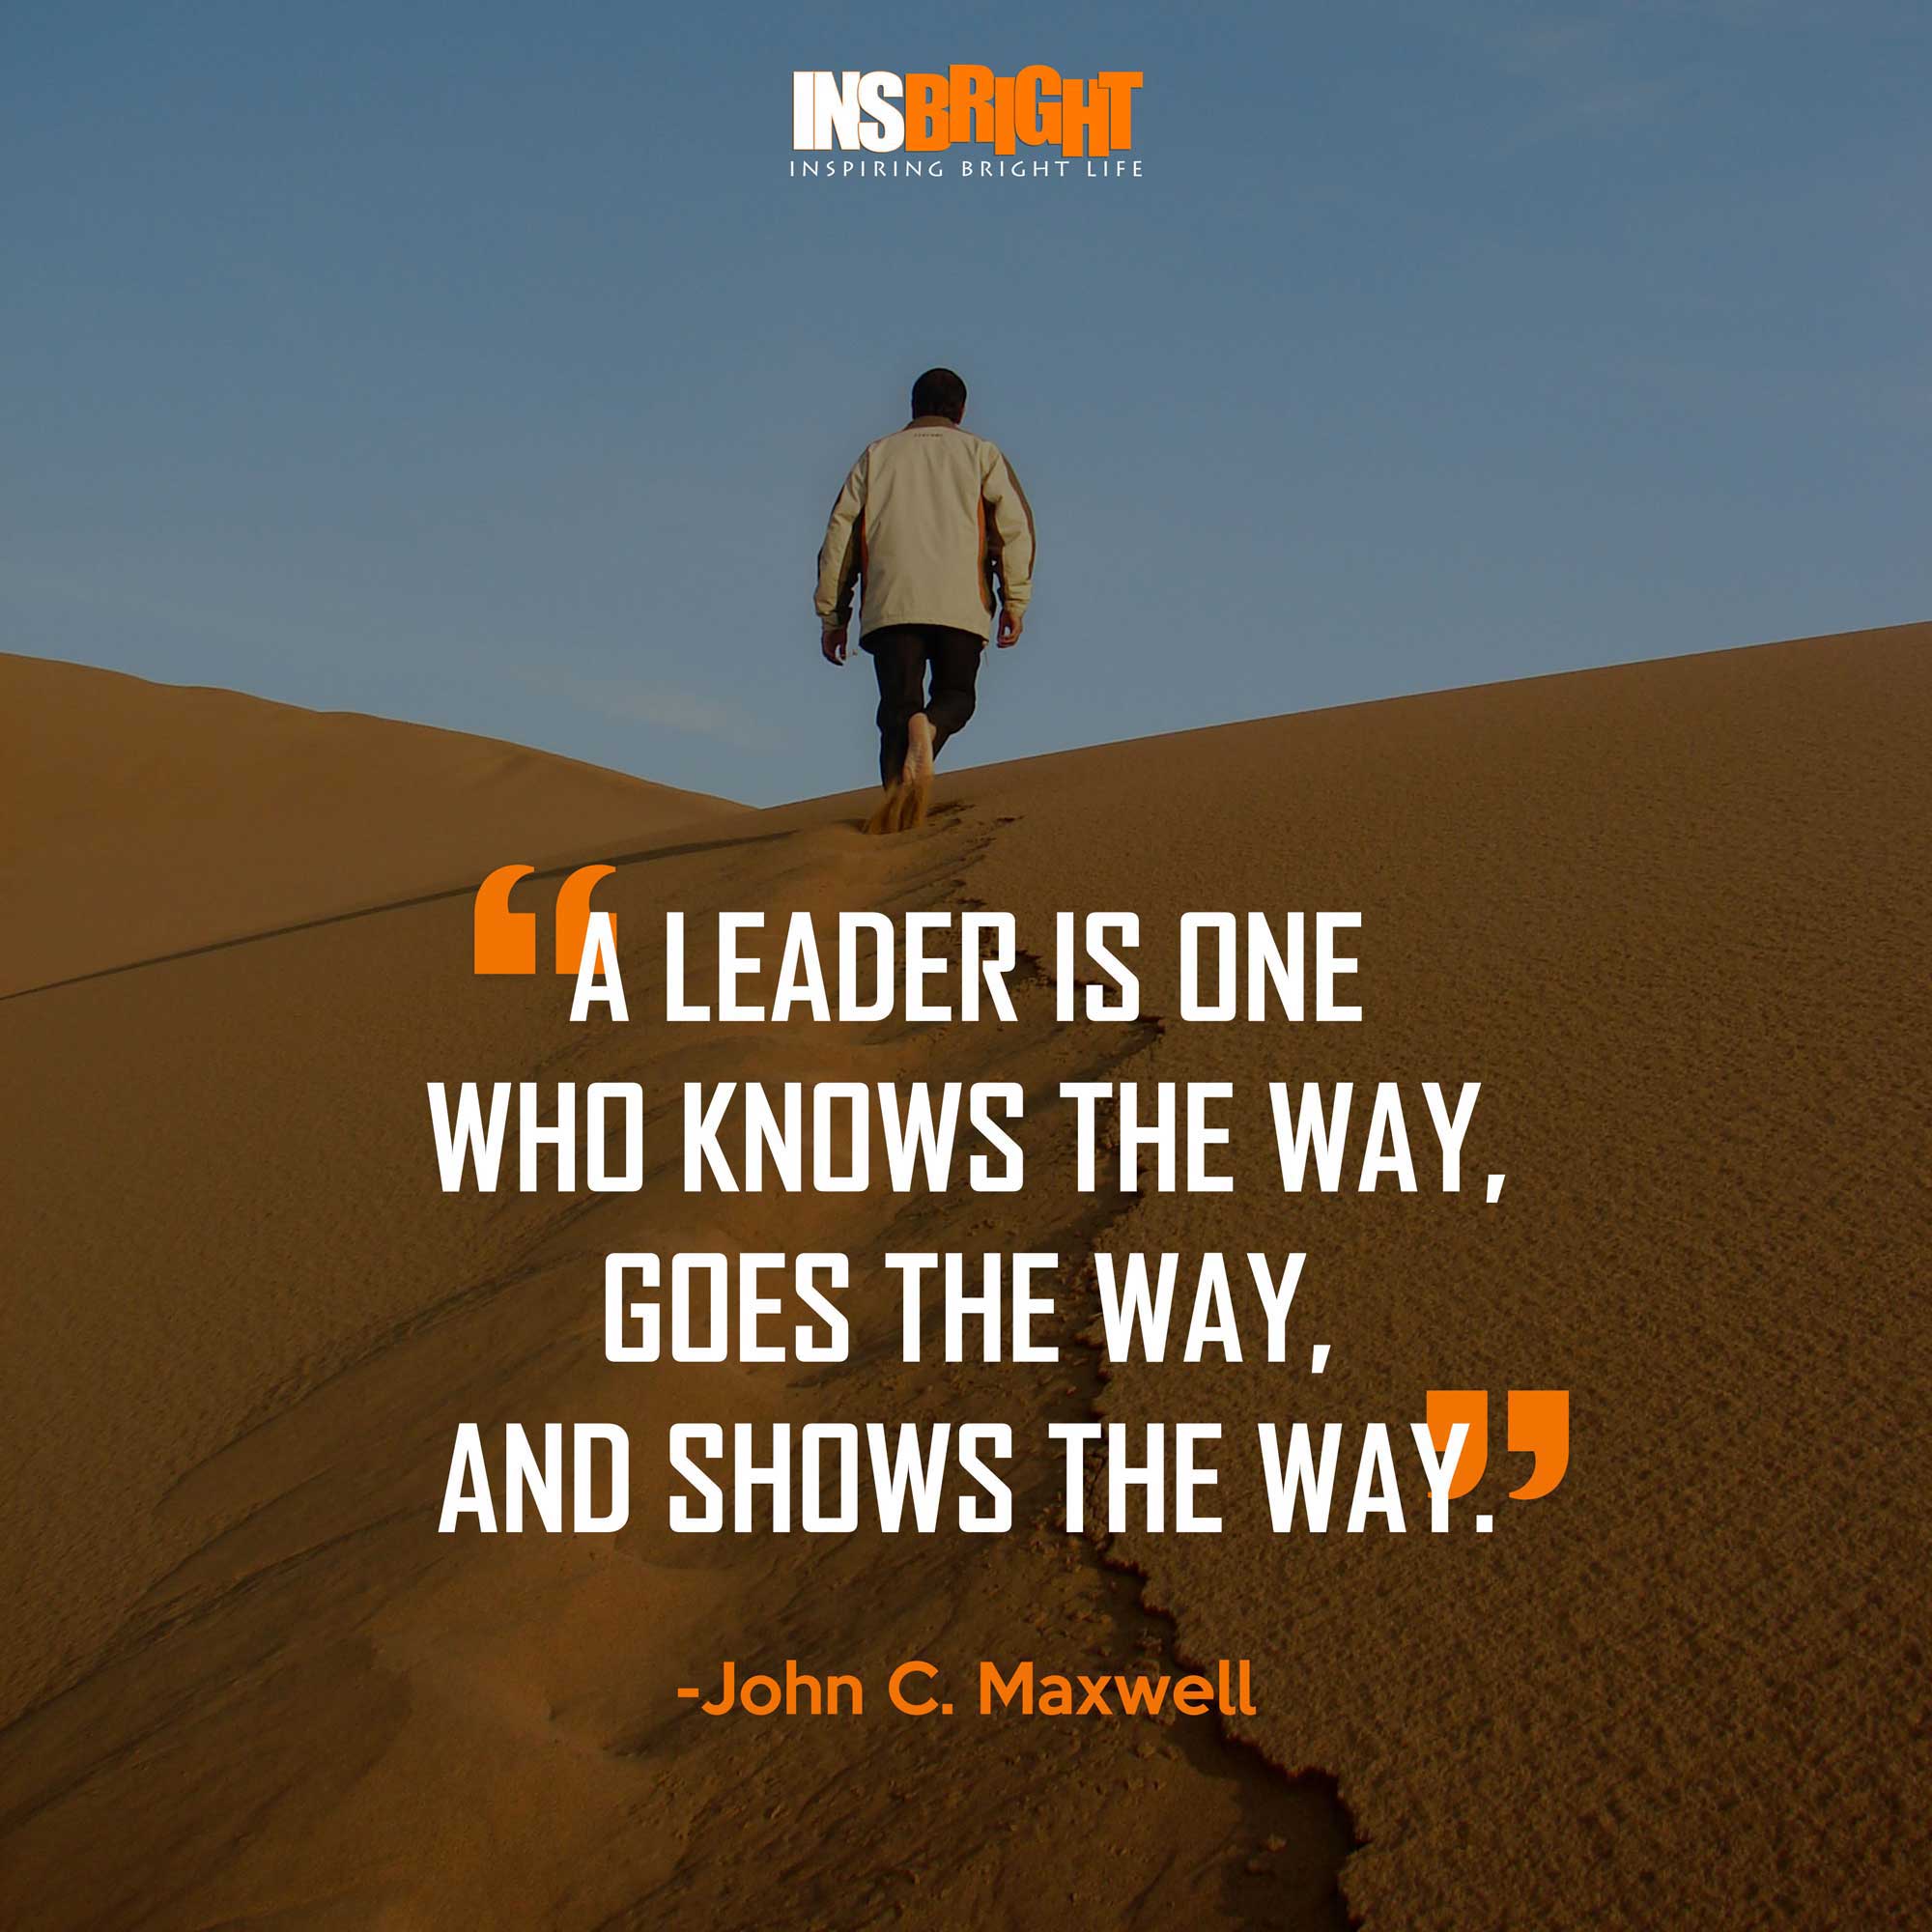 50 Best Quotes On Leadership The Inspiring Journal - Riset